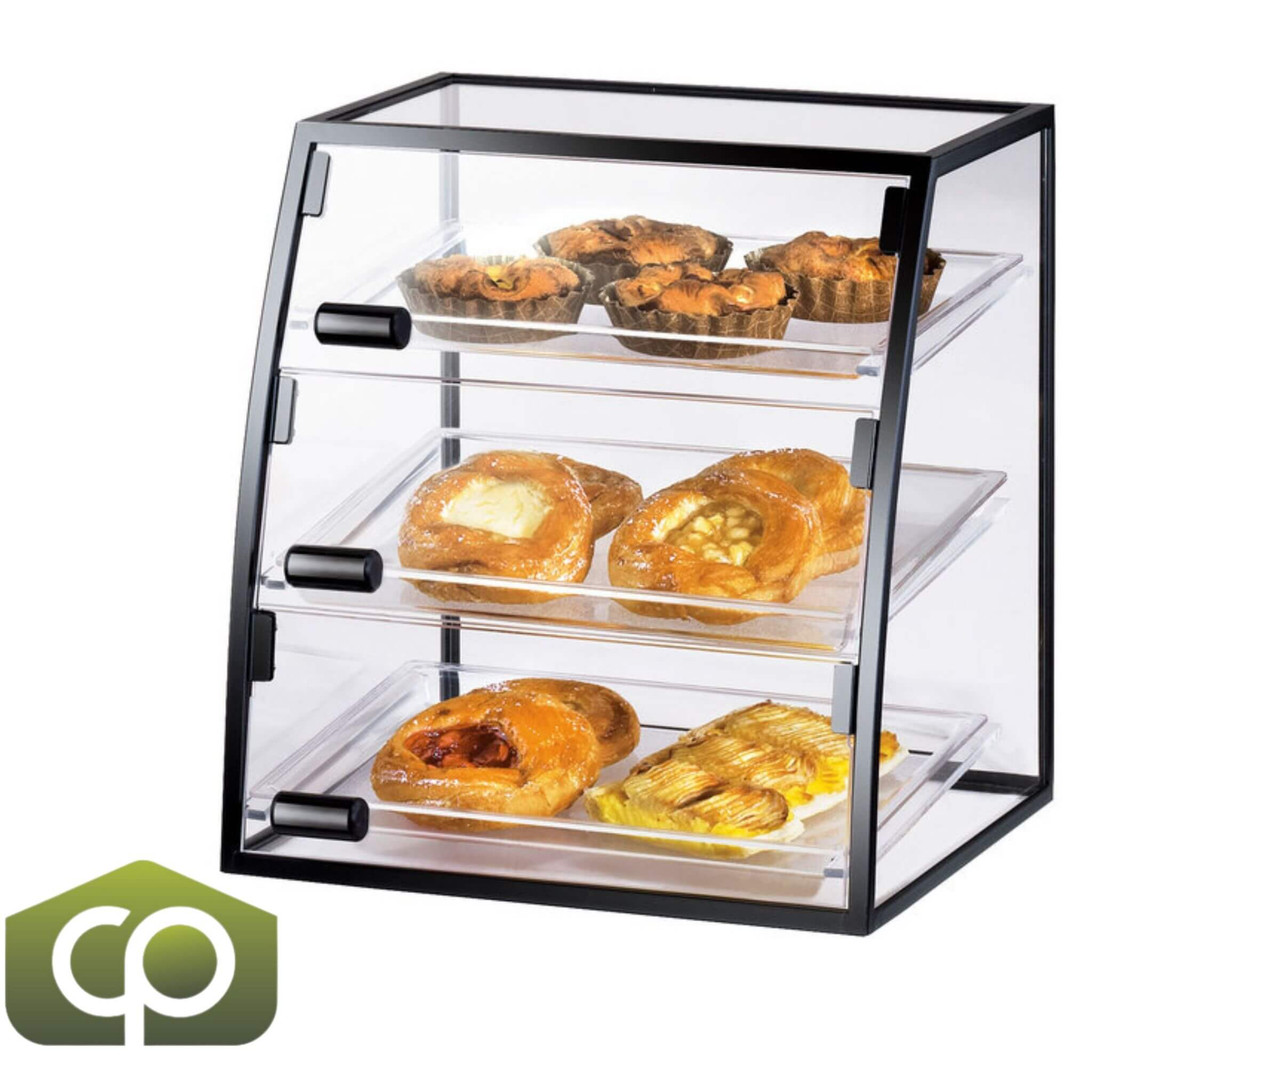 Cal-Mil 18" x 16" x 21" Iron Curved Self-Service Display Case - Chic Convenience-Chicken Pieces